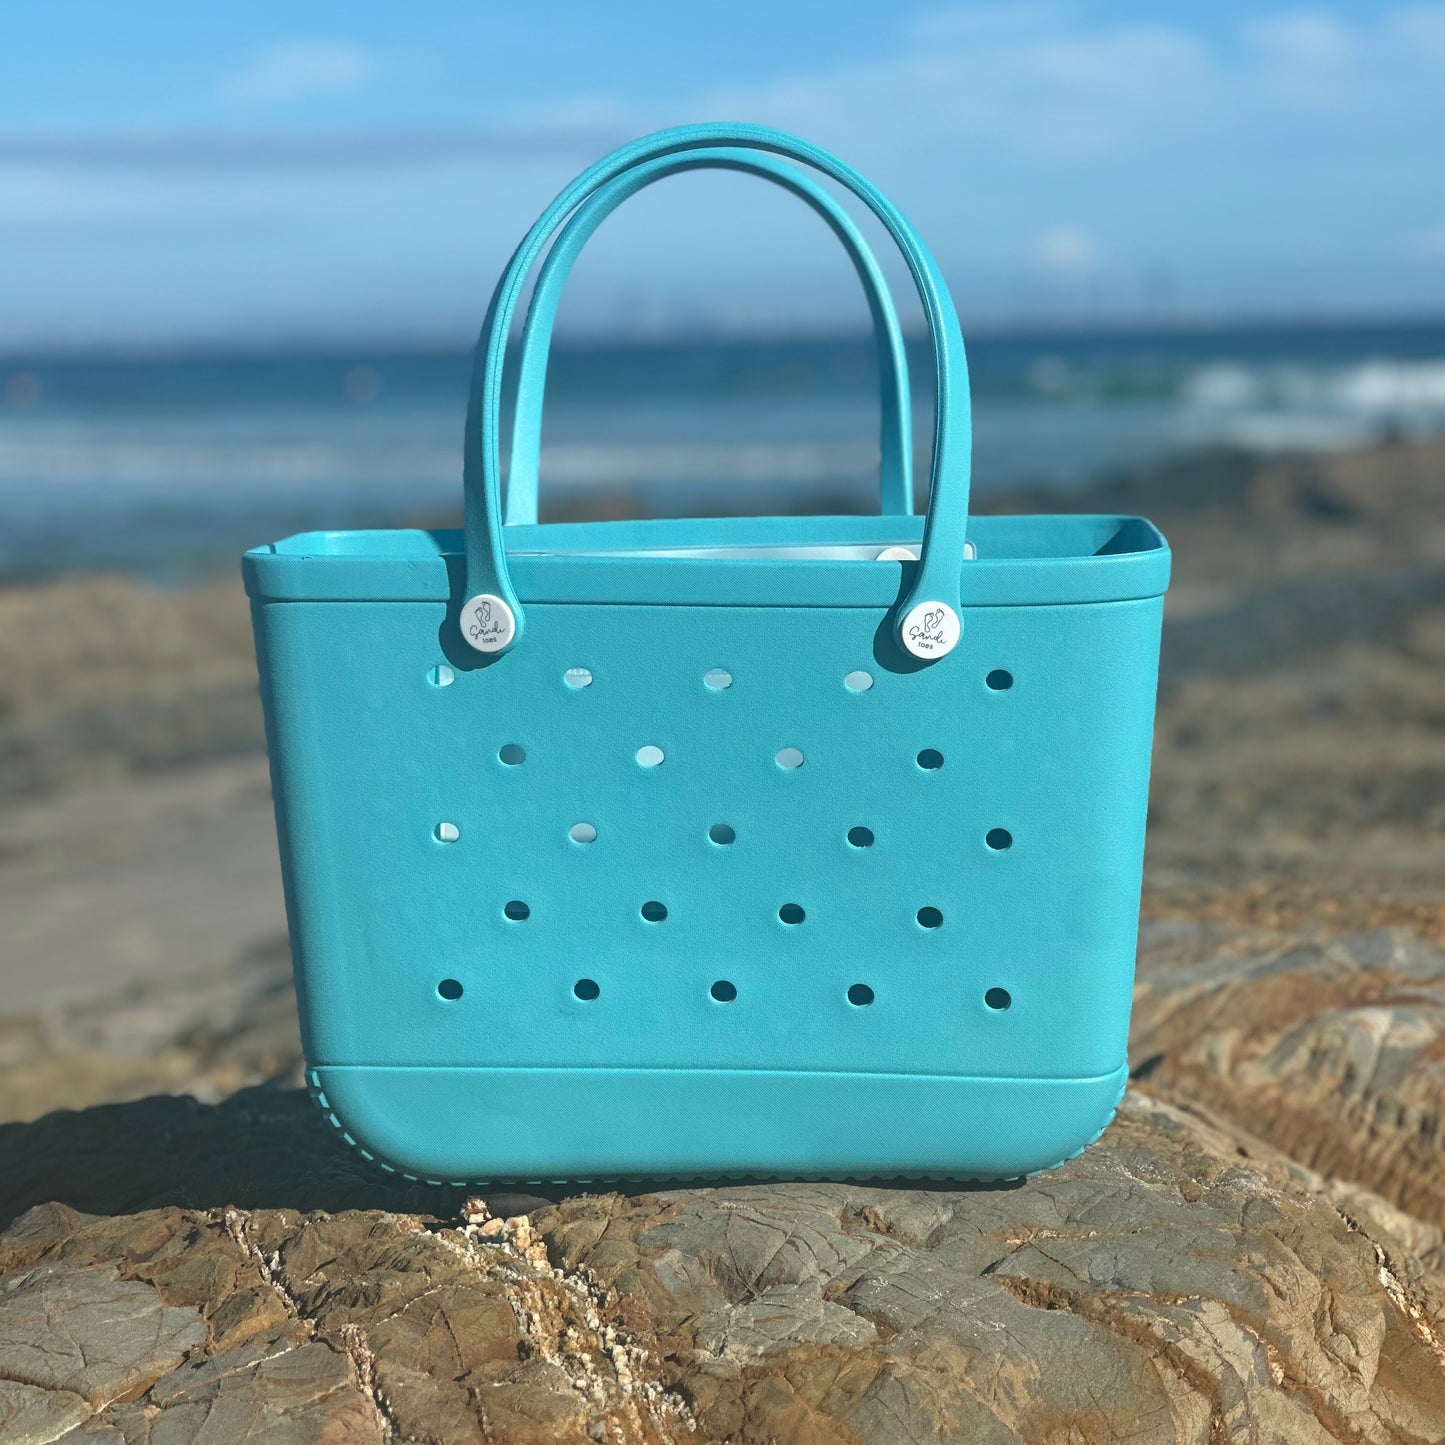 Aqua Marine Silicone Bag: Beach Essentials at Snapper Rocks. [Durable aqua marine silicone bag rests on the iconic rocks of Snapper Rocks, a world-famous surfing spot.]